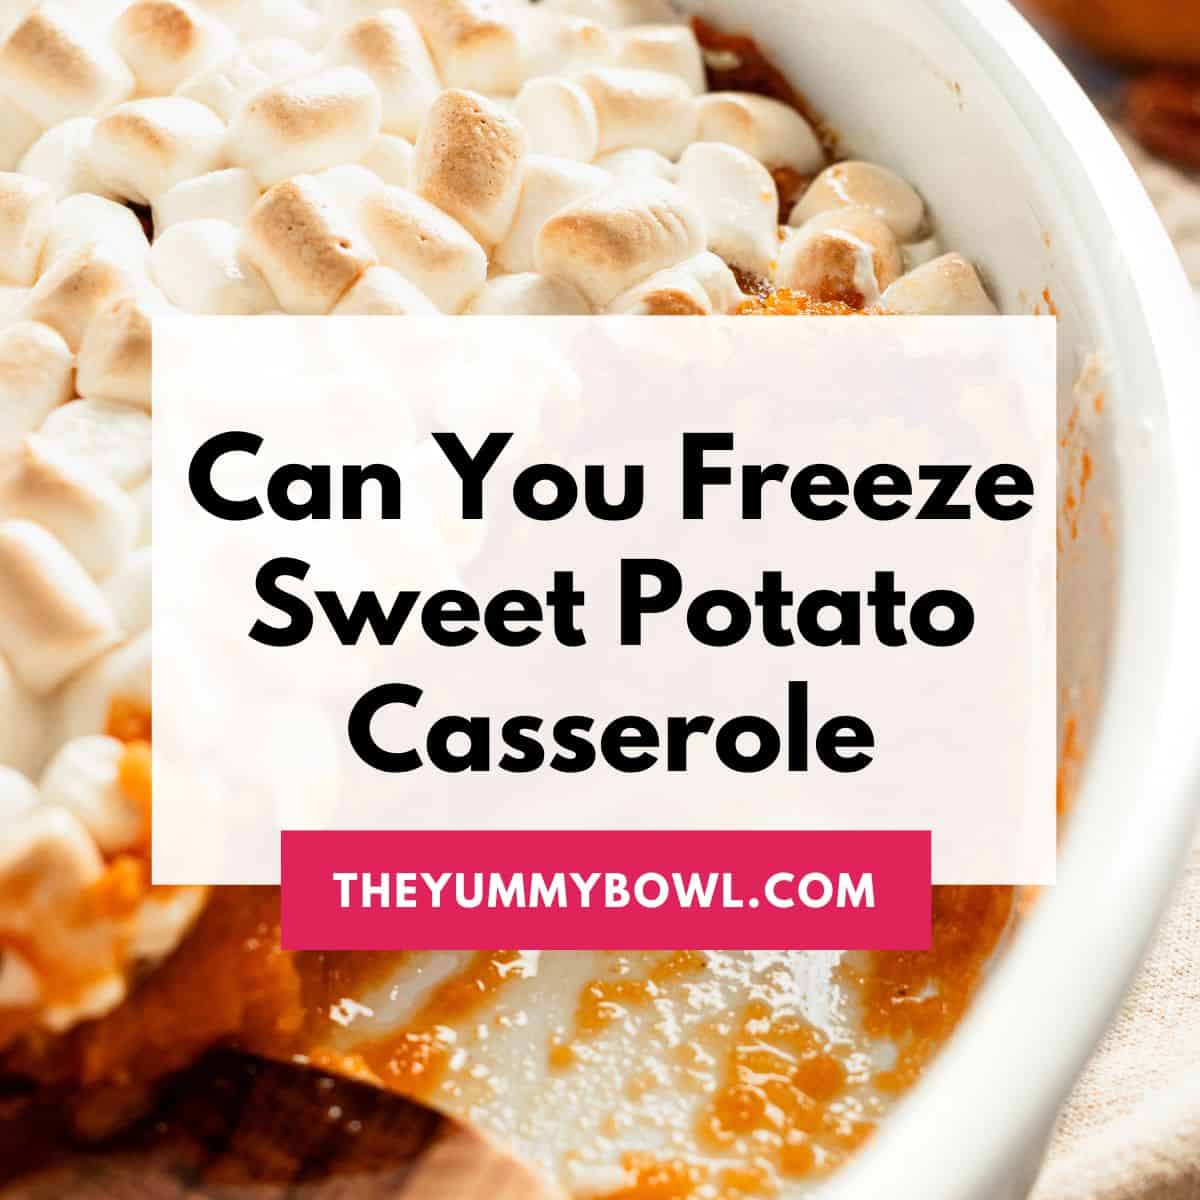 How To Freeze Sweet Potato Casserole So It Lasts! - The Yummy Bowl